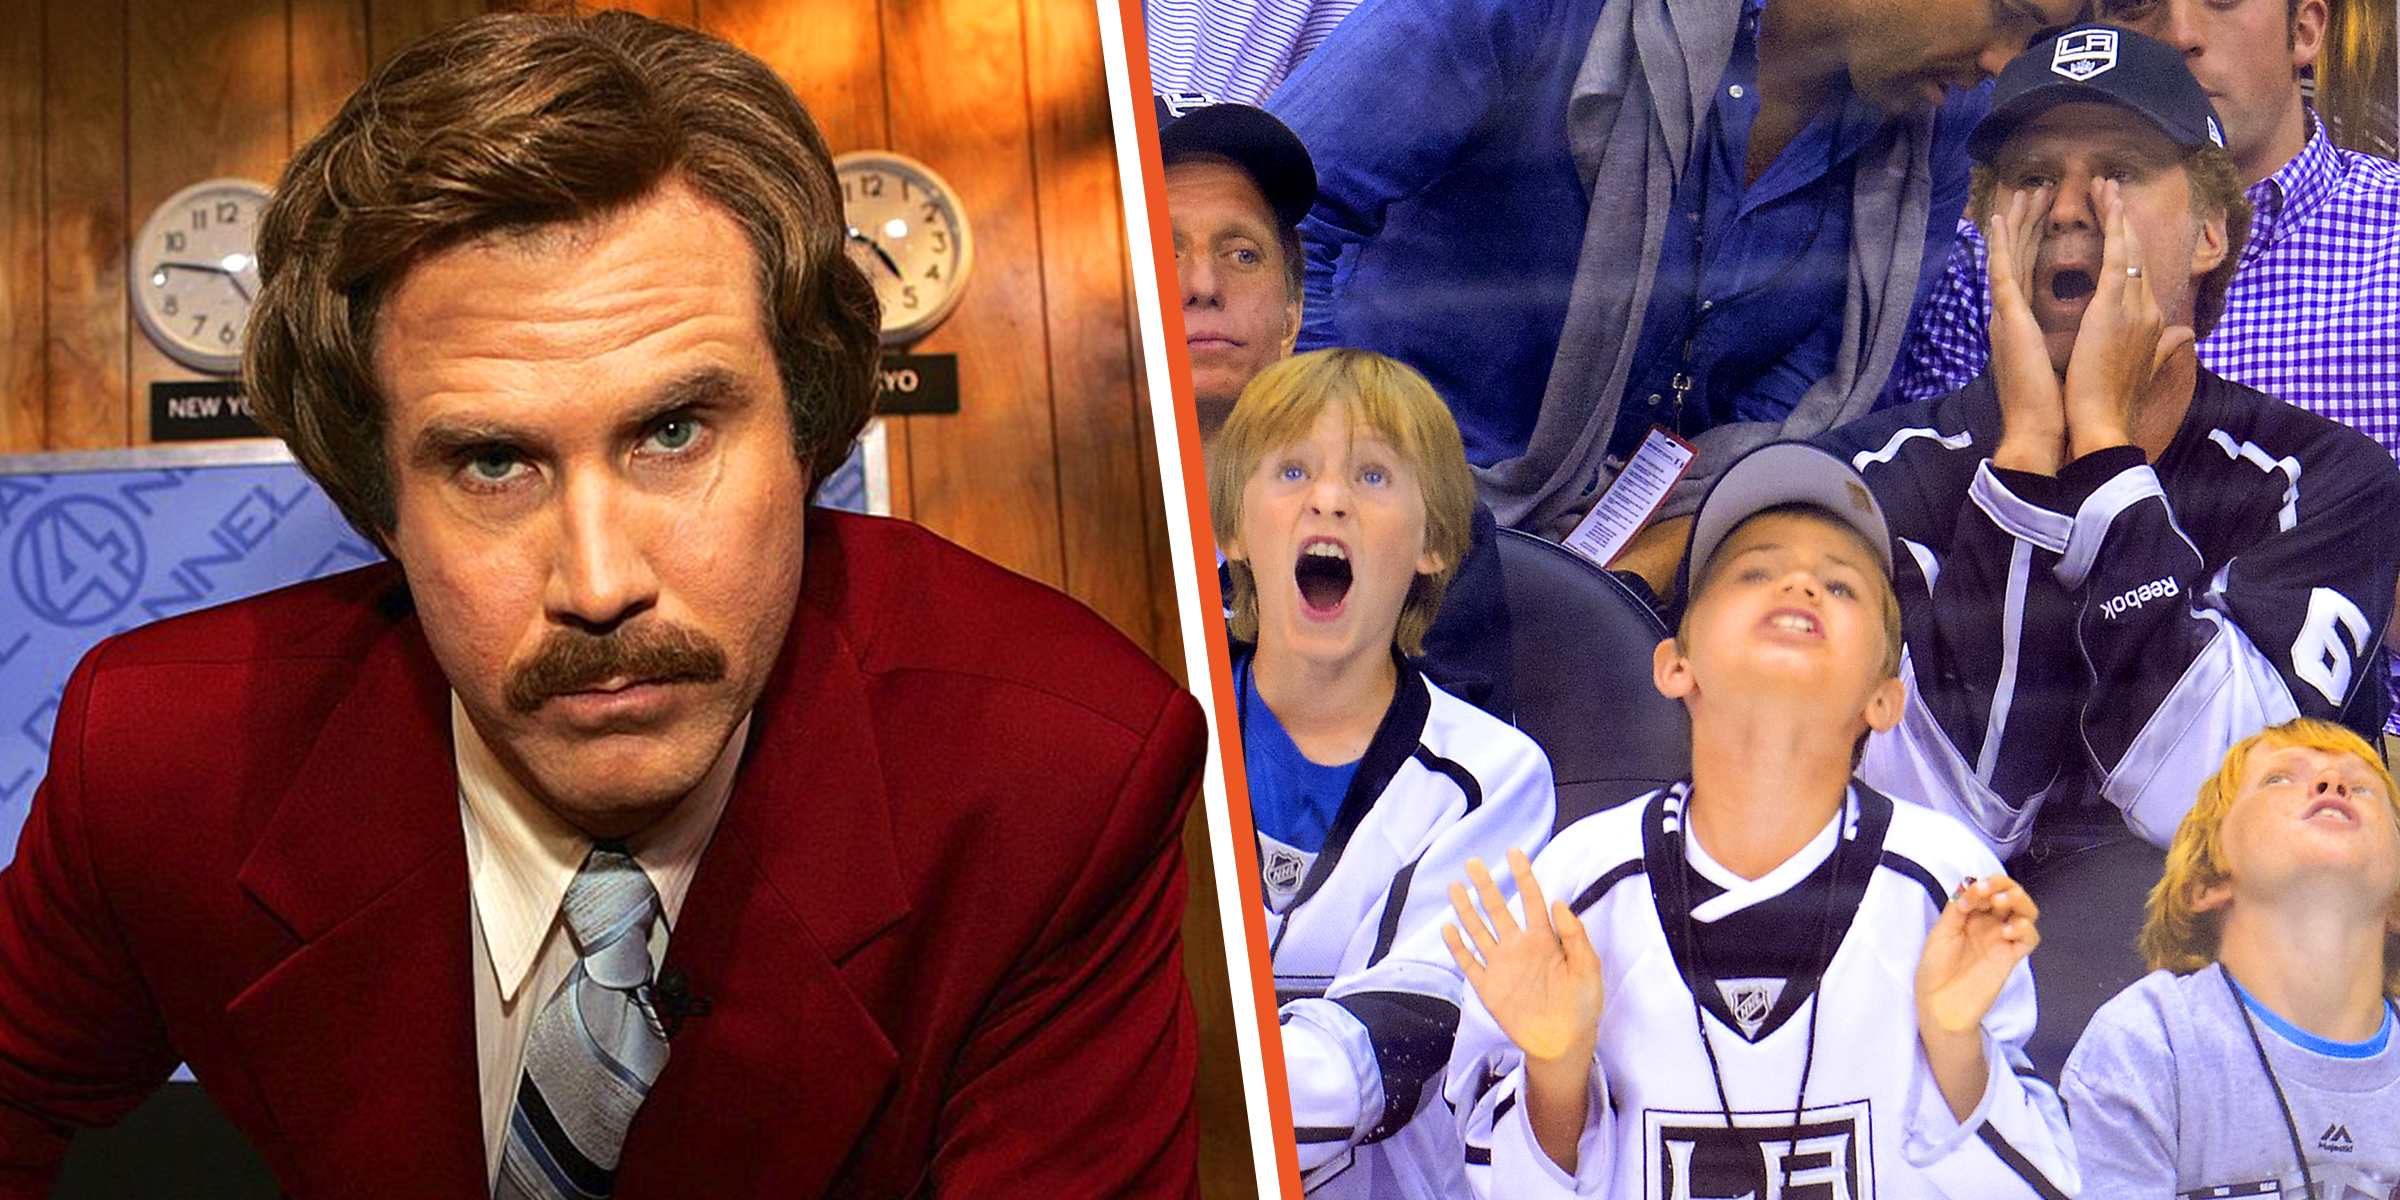 Will Ferrell | Will Ferrell's kids Mattias, Axel, and Magnus | Source: Getty Images